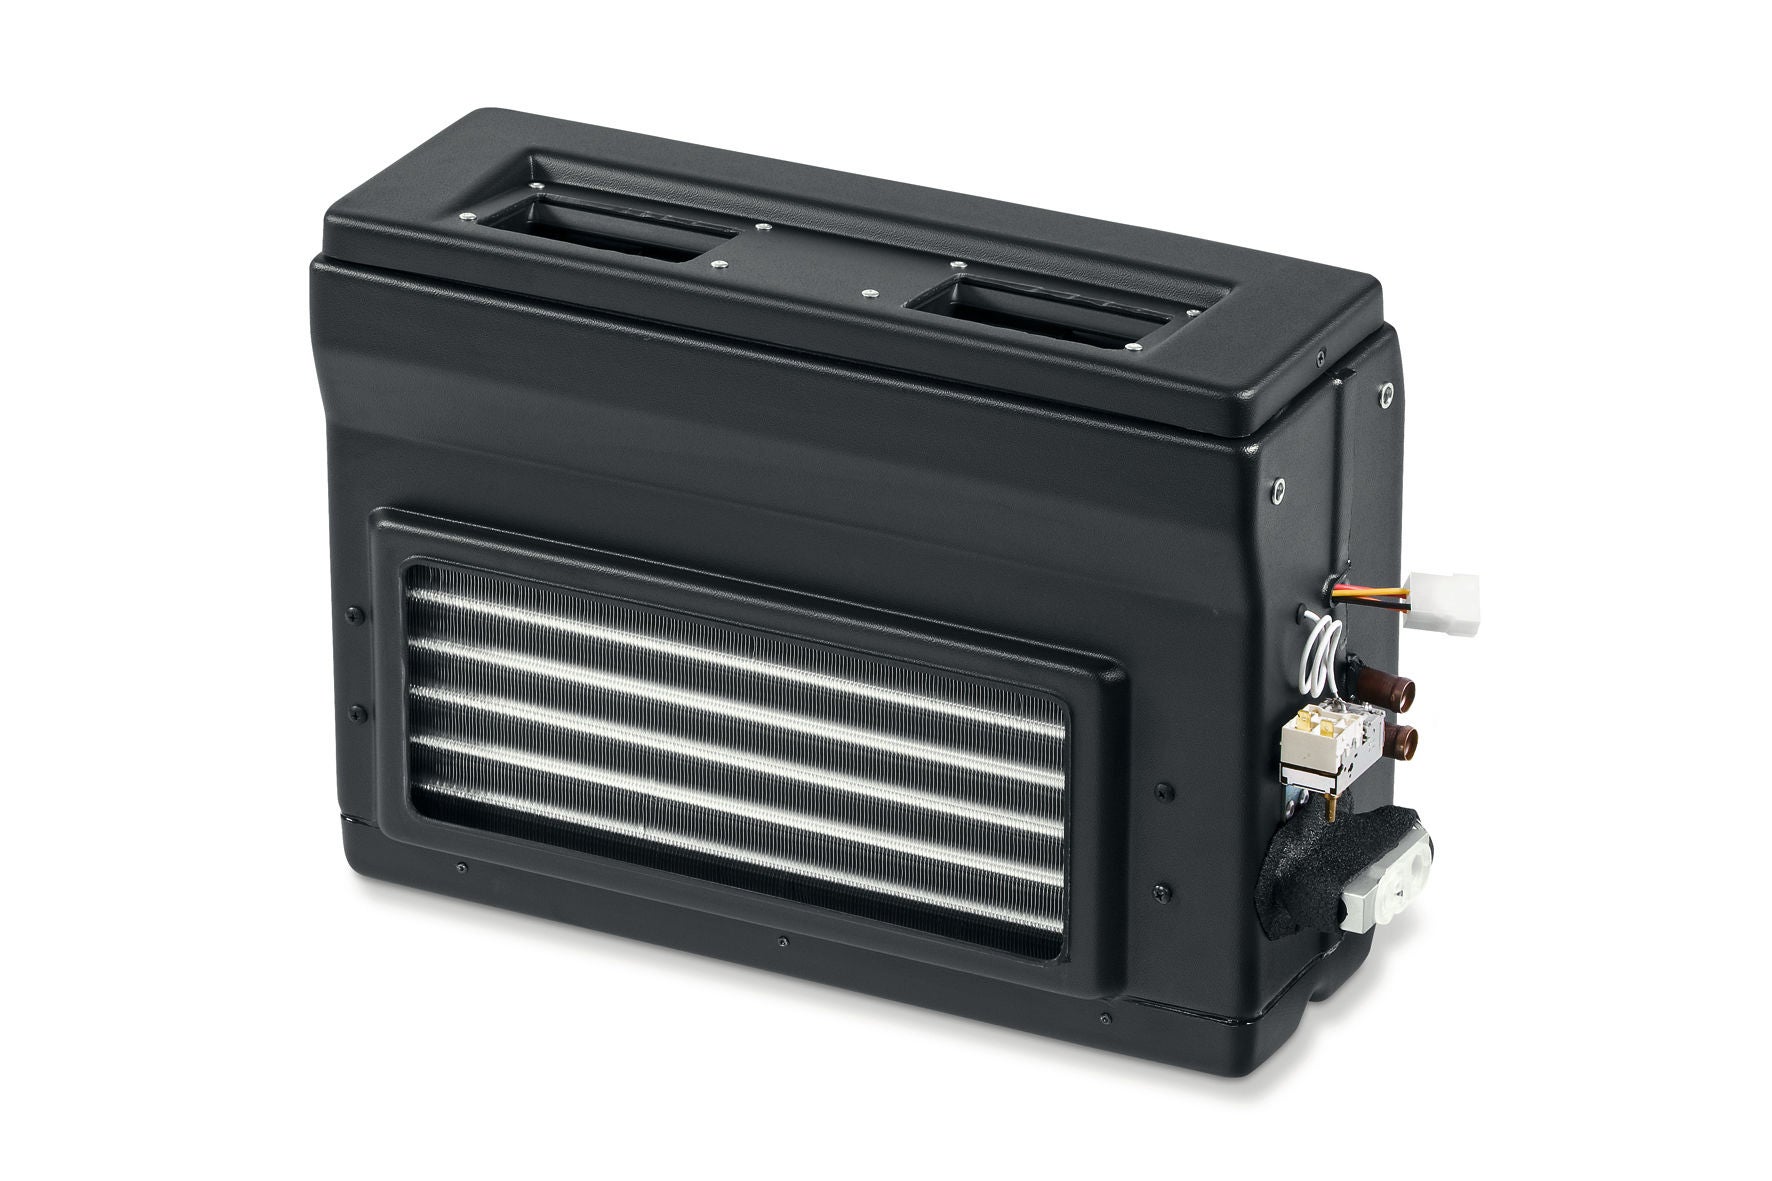 Product picture of Webasto integrated air-conditioning system model Ibiza